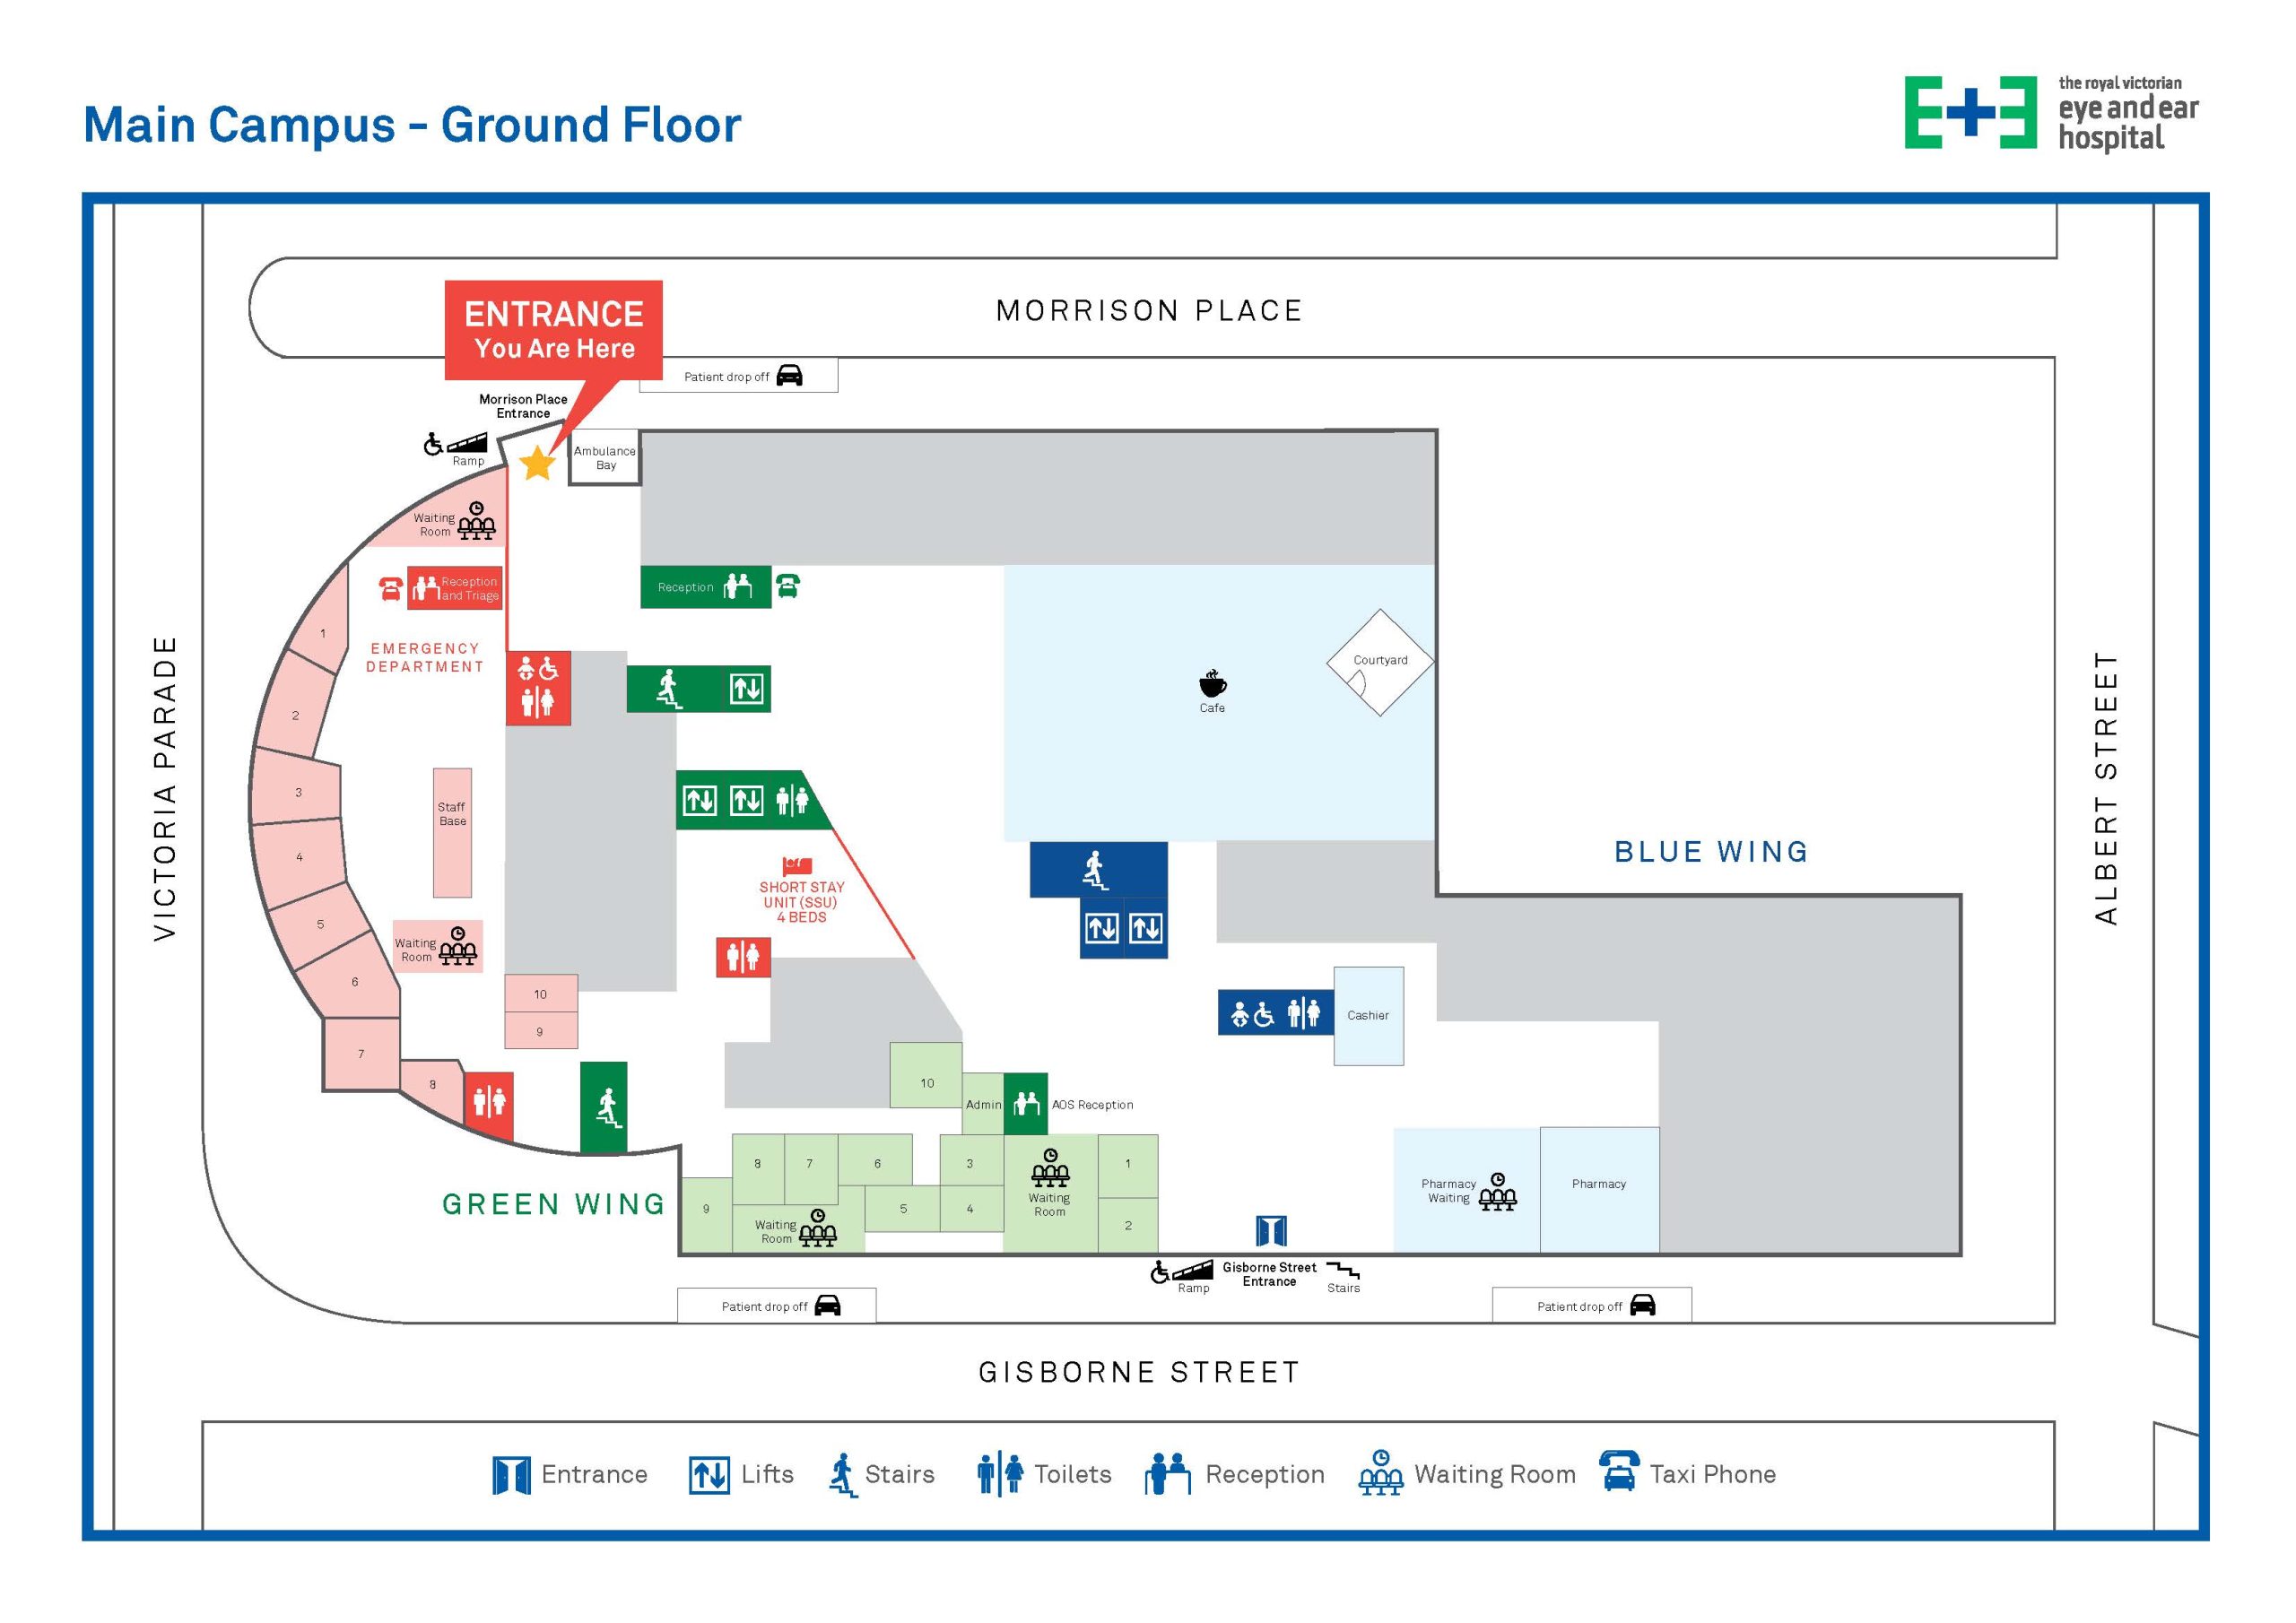 Simplified map of the ground floor of the hospital.